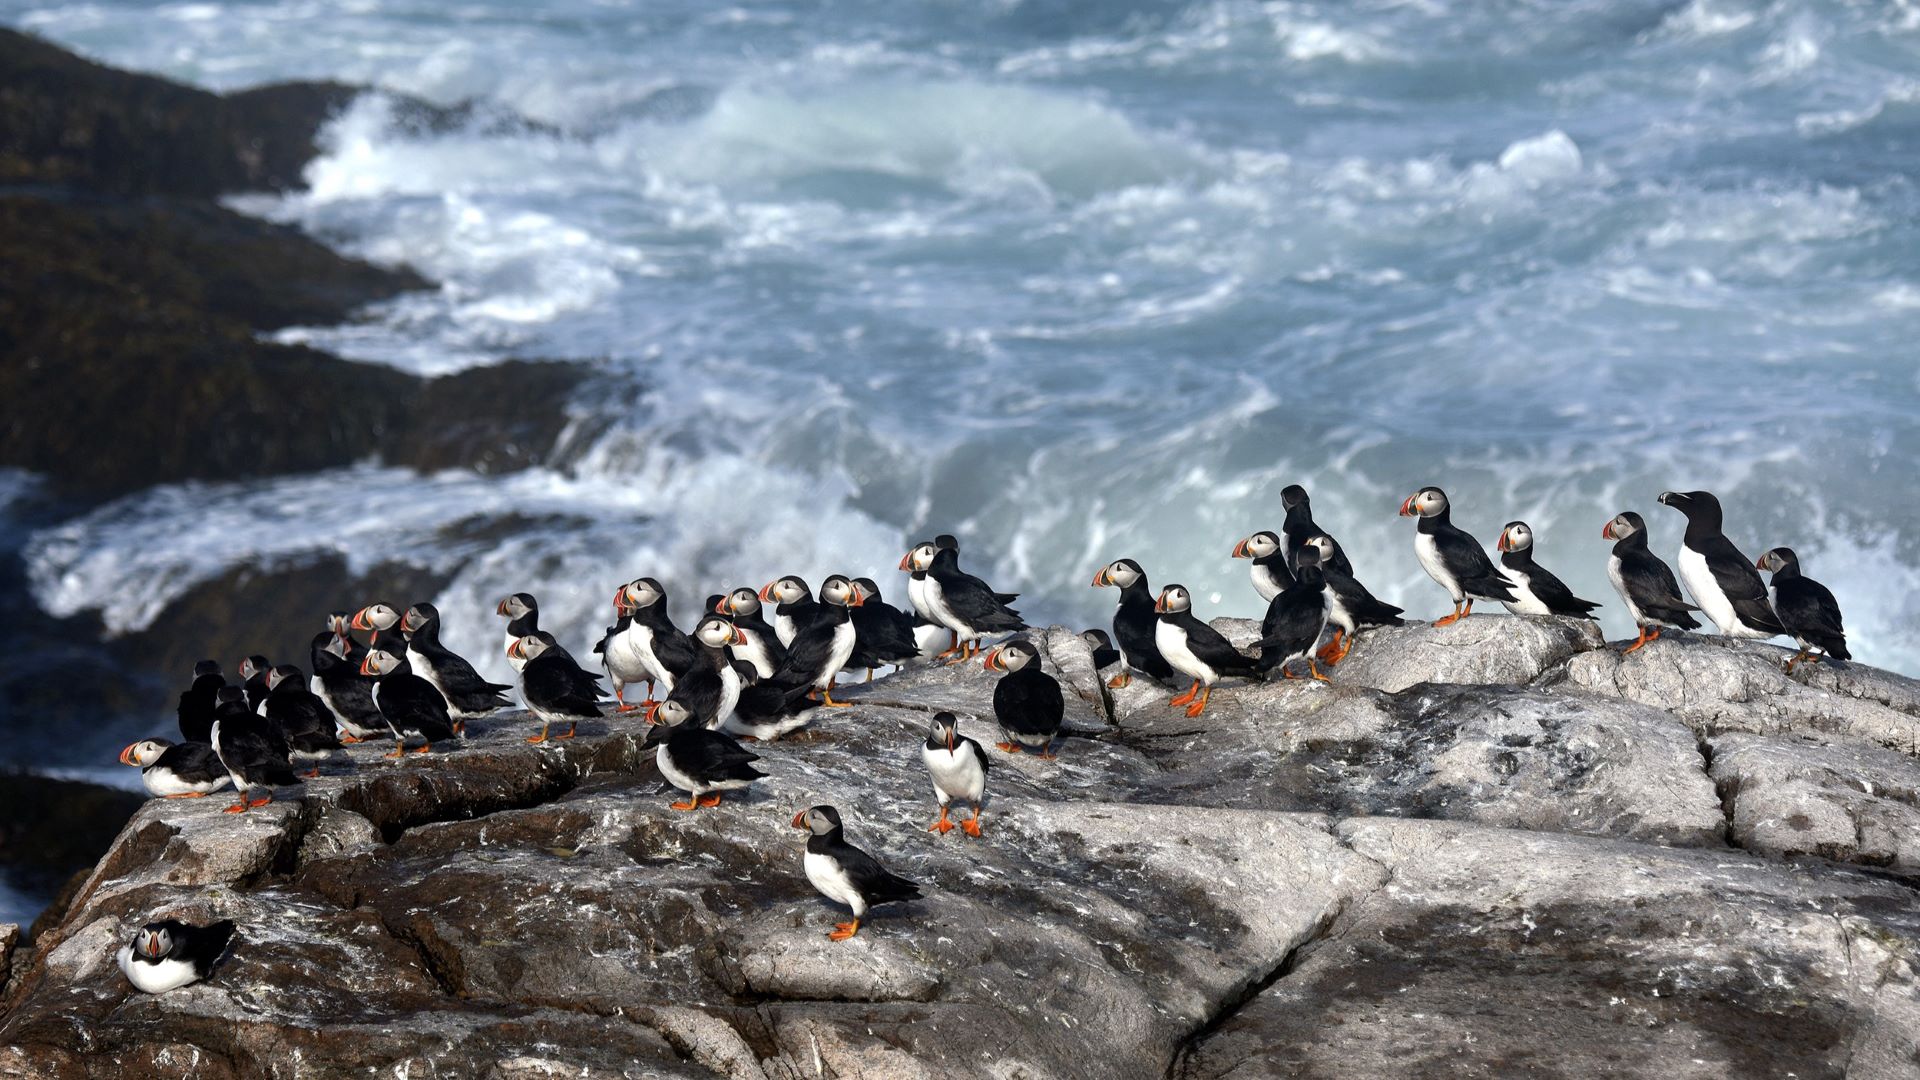 A large group of puffins on top of a cluster of rocks by the ocean